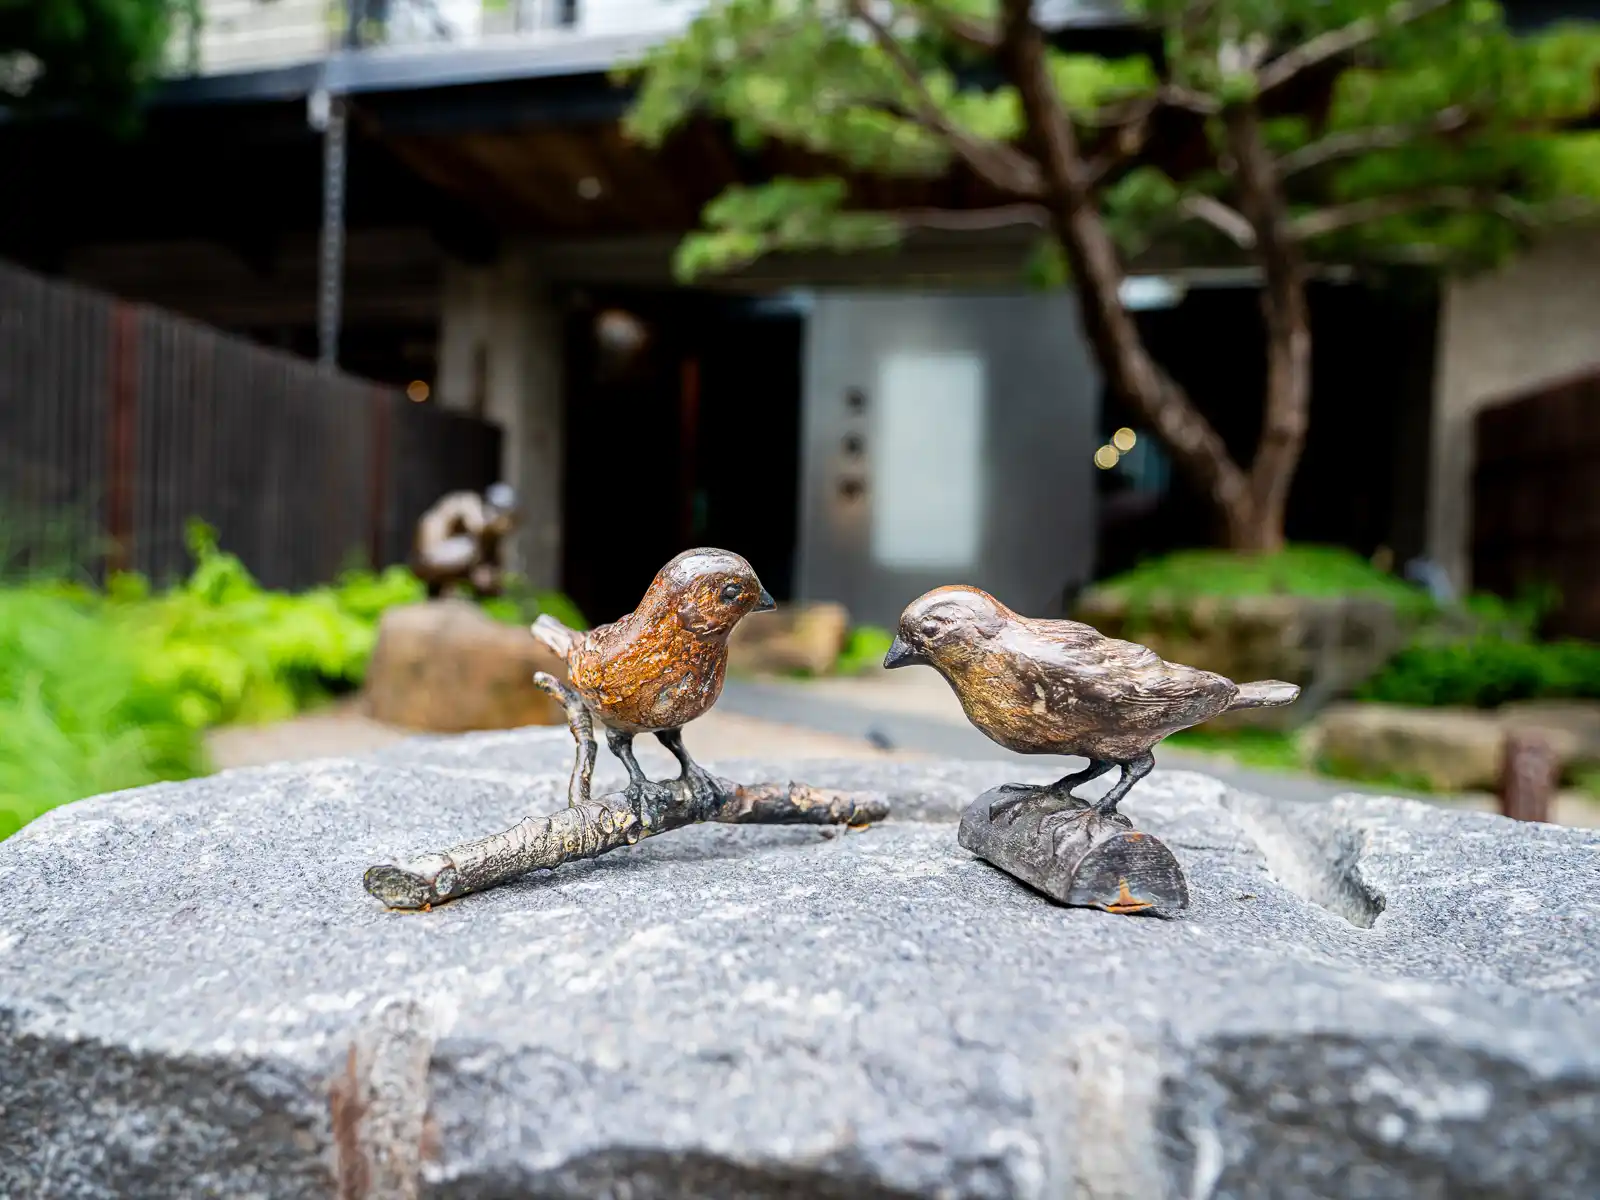 A small sculpture of two birds is on display outside.